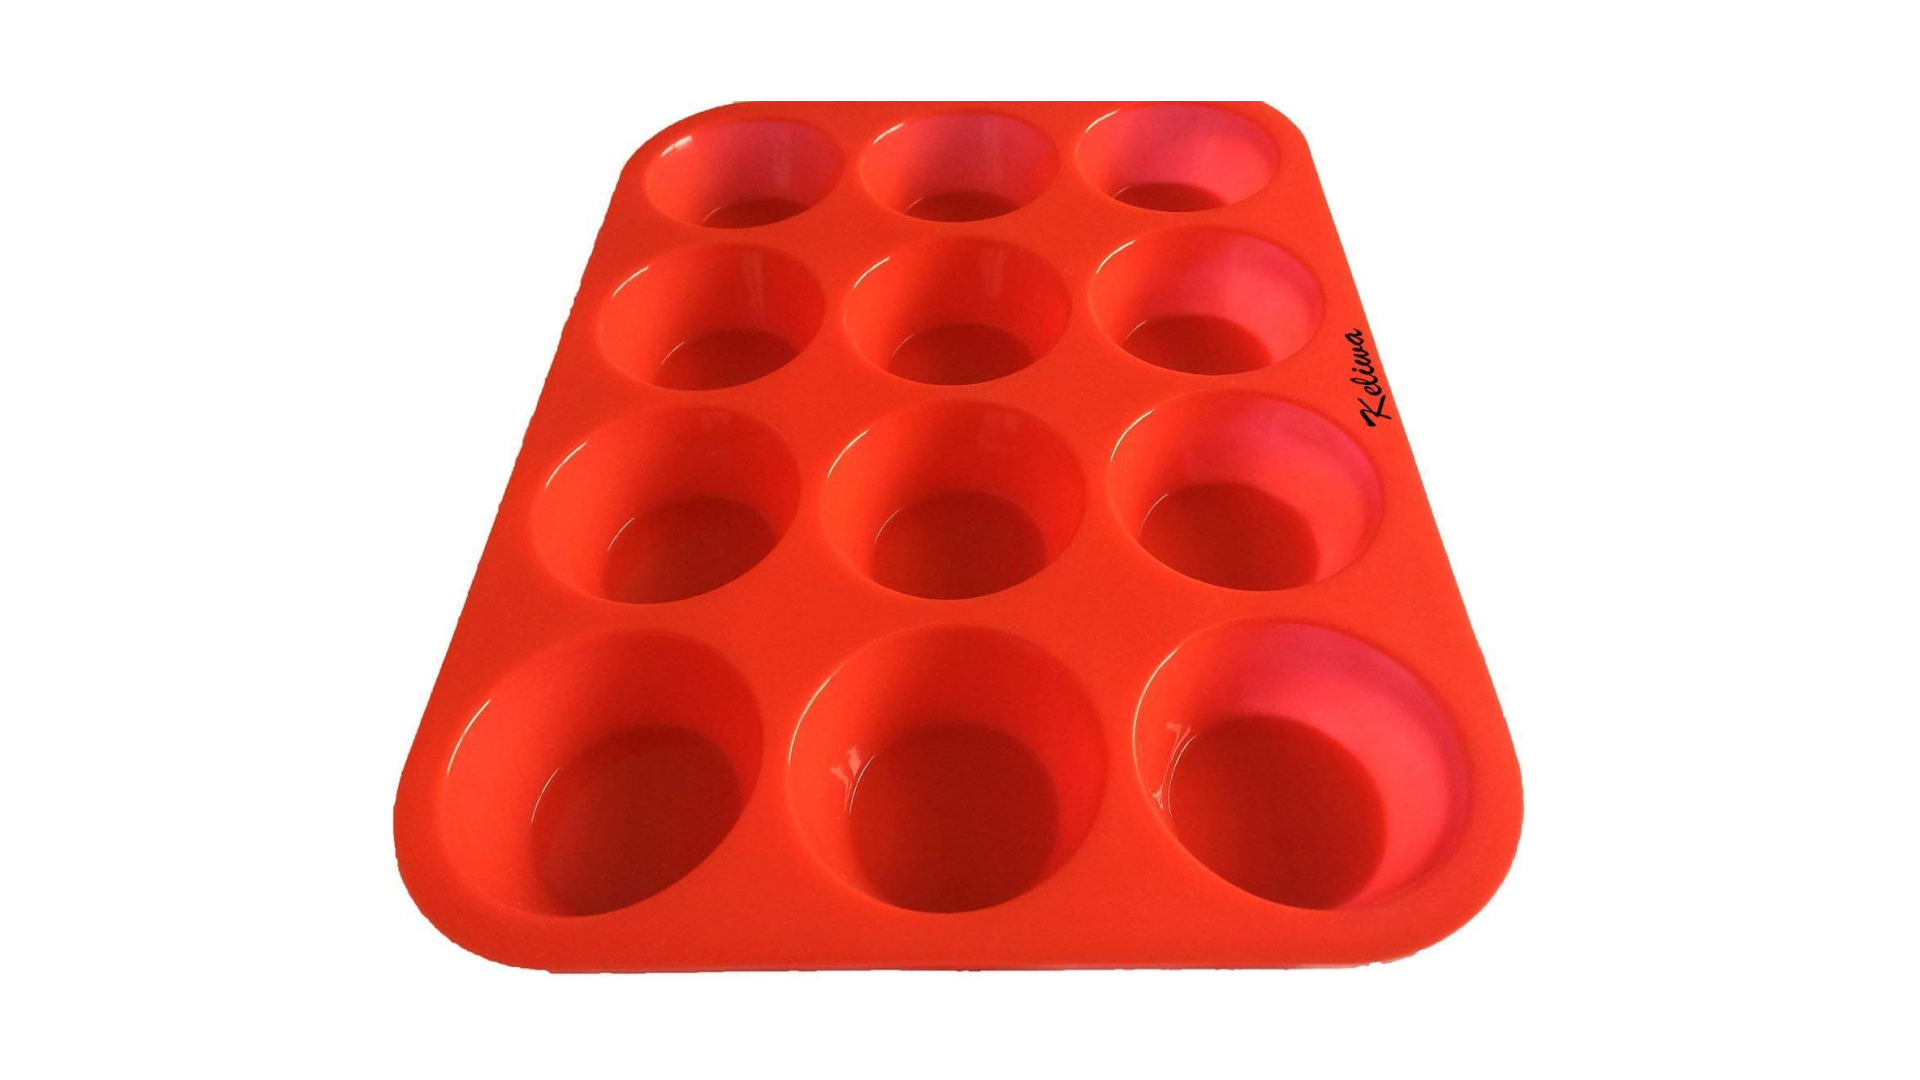 reusable silicone muffin pan so you can get treats out easily and without paper liners